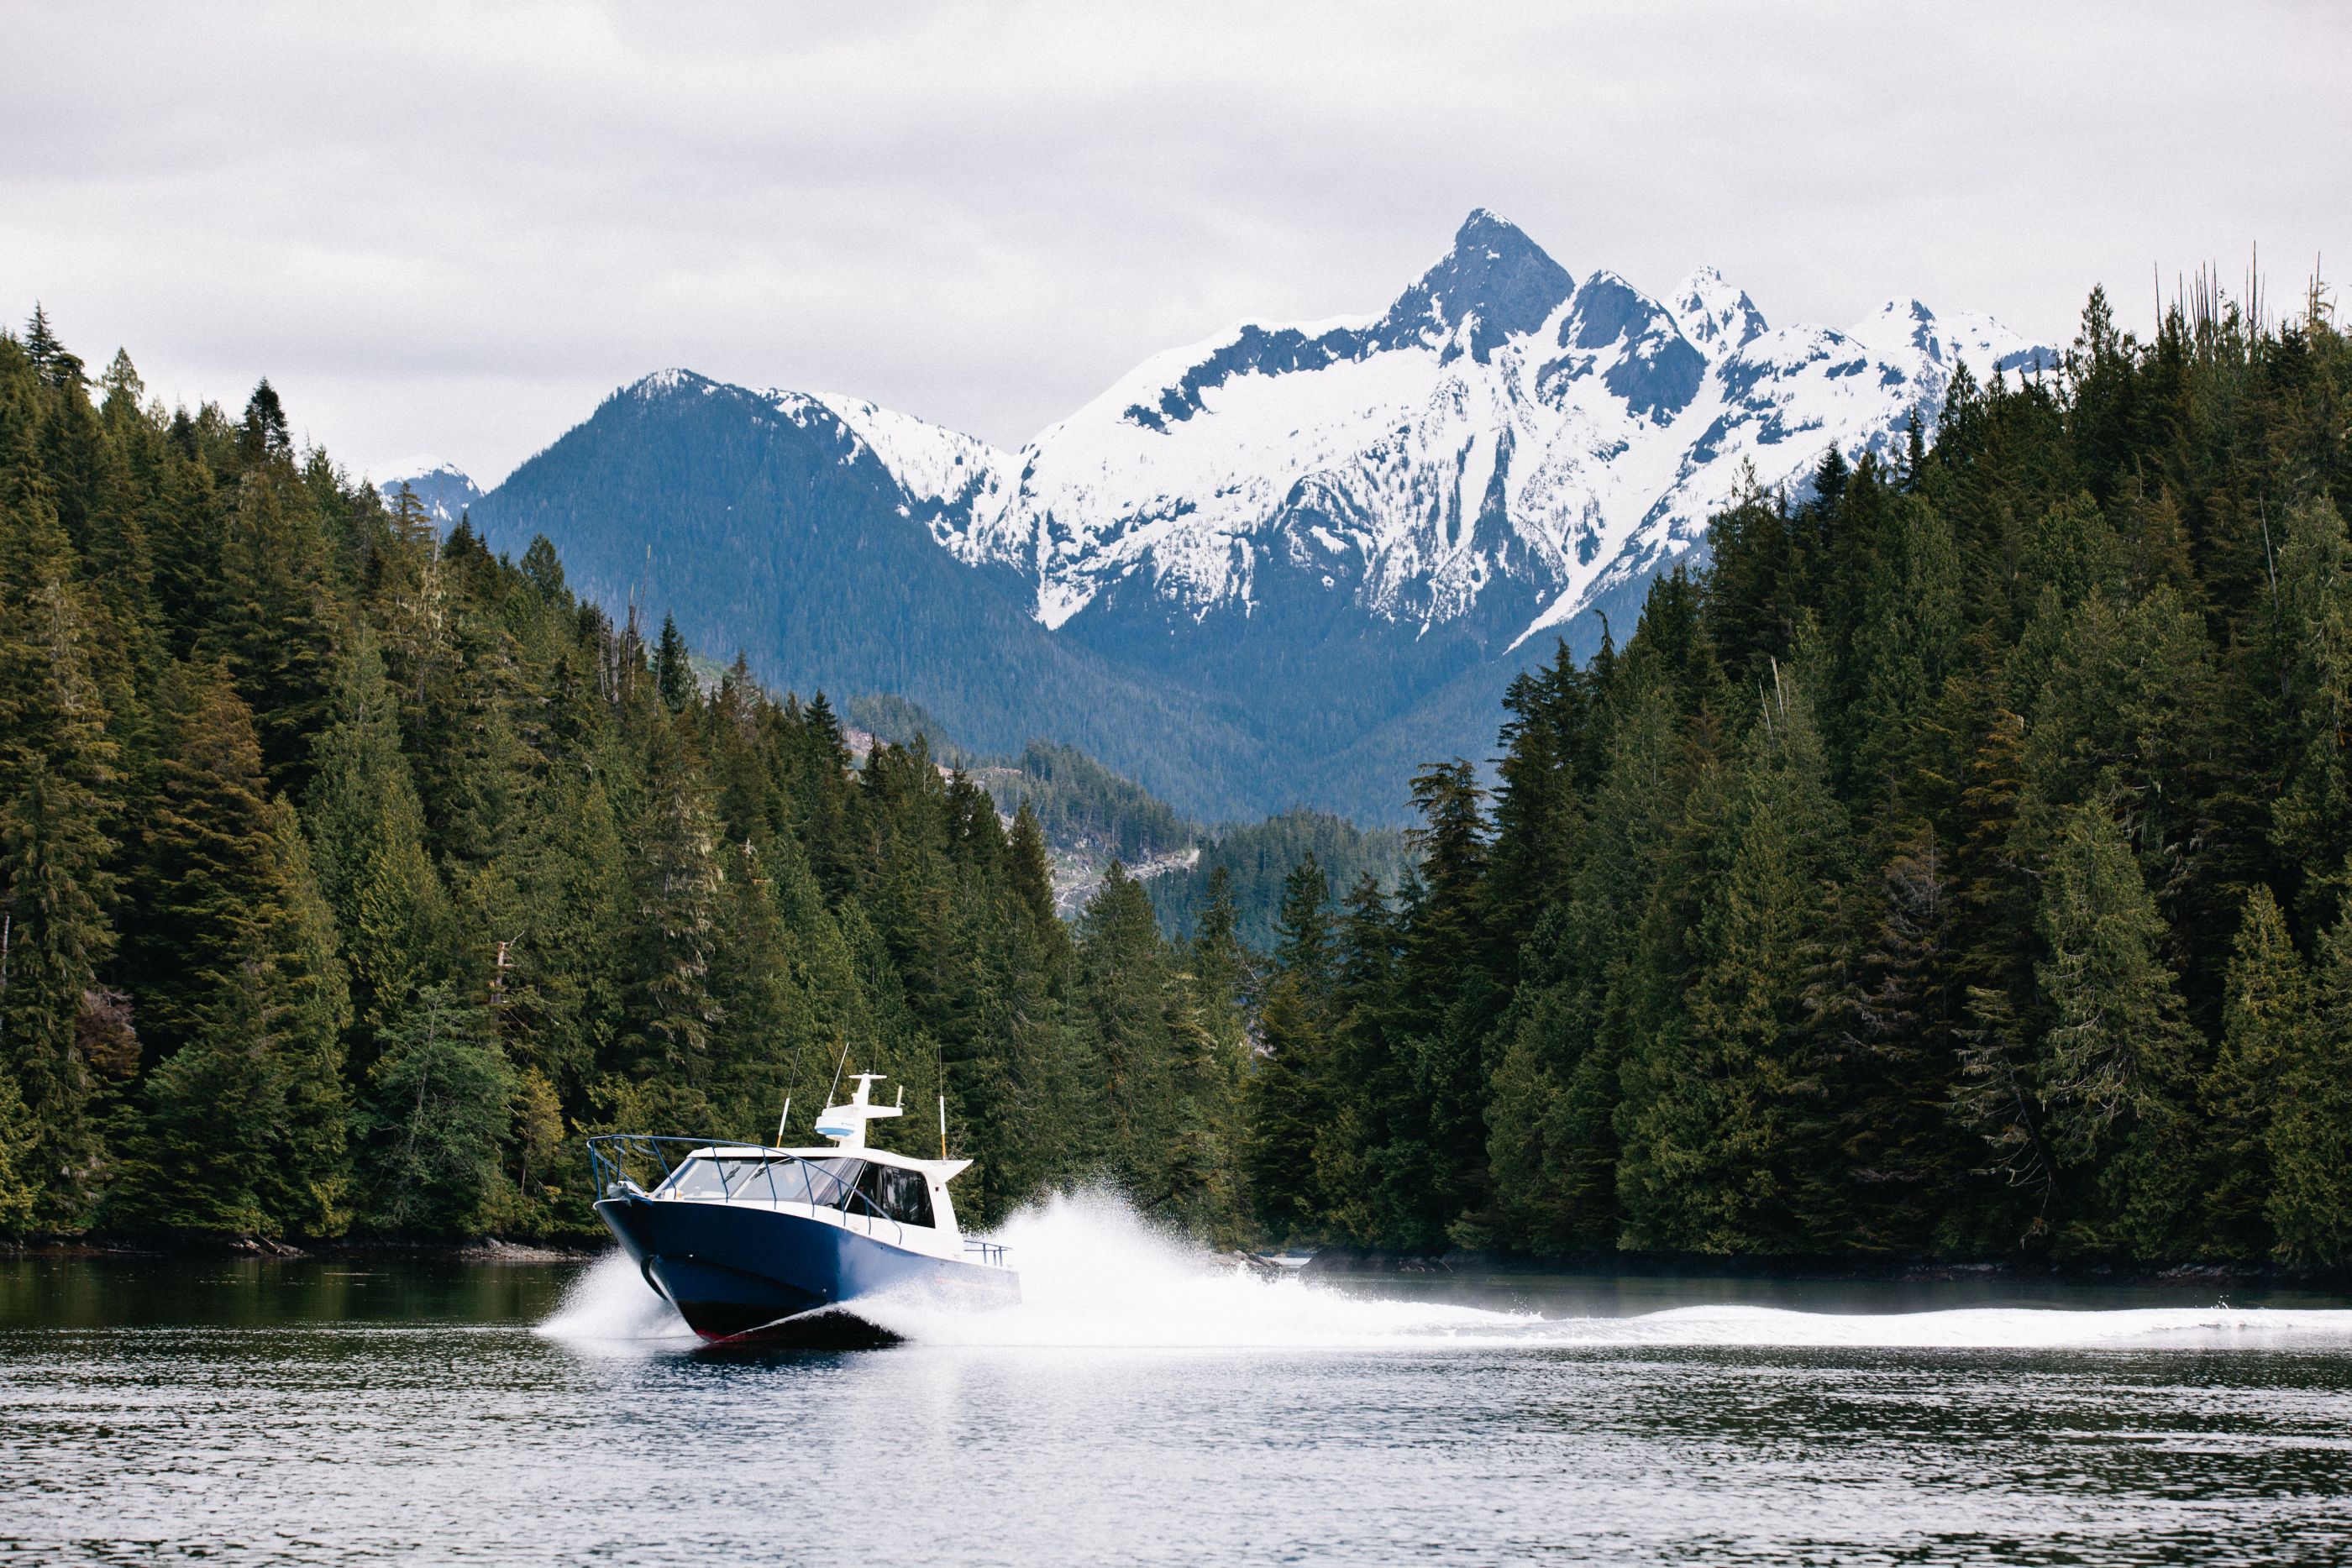 Speedboat with mountains and forest near Nimmo Bay Wilderness Resort, Canada